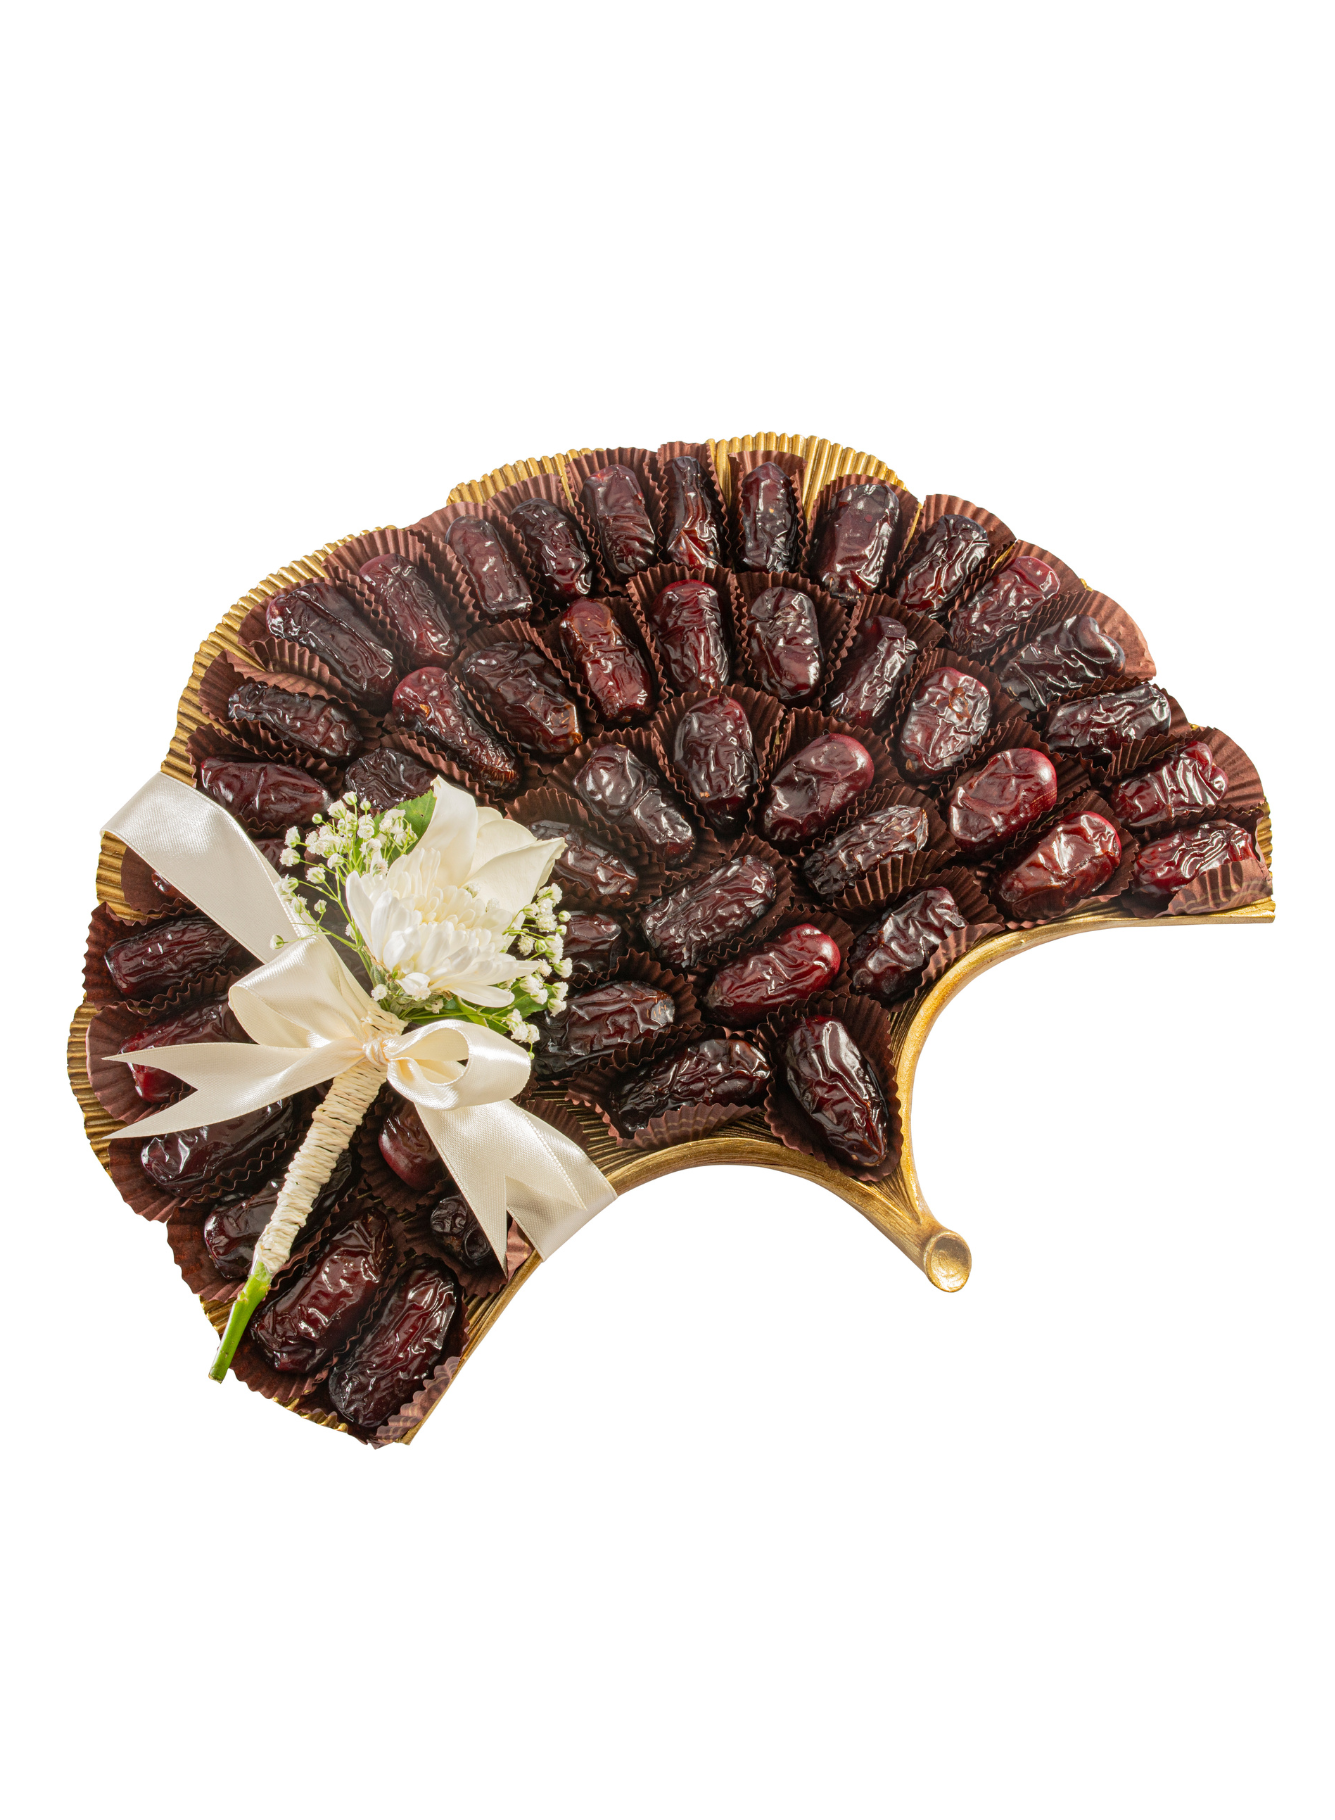 Safawi Dates with Golden Platter with Ribbon (46 Pcs)